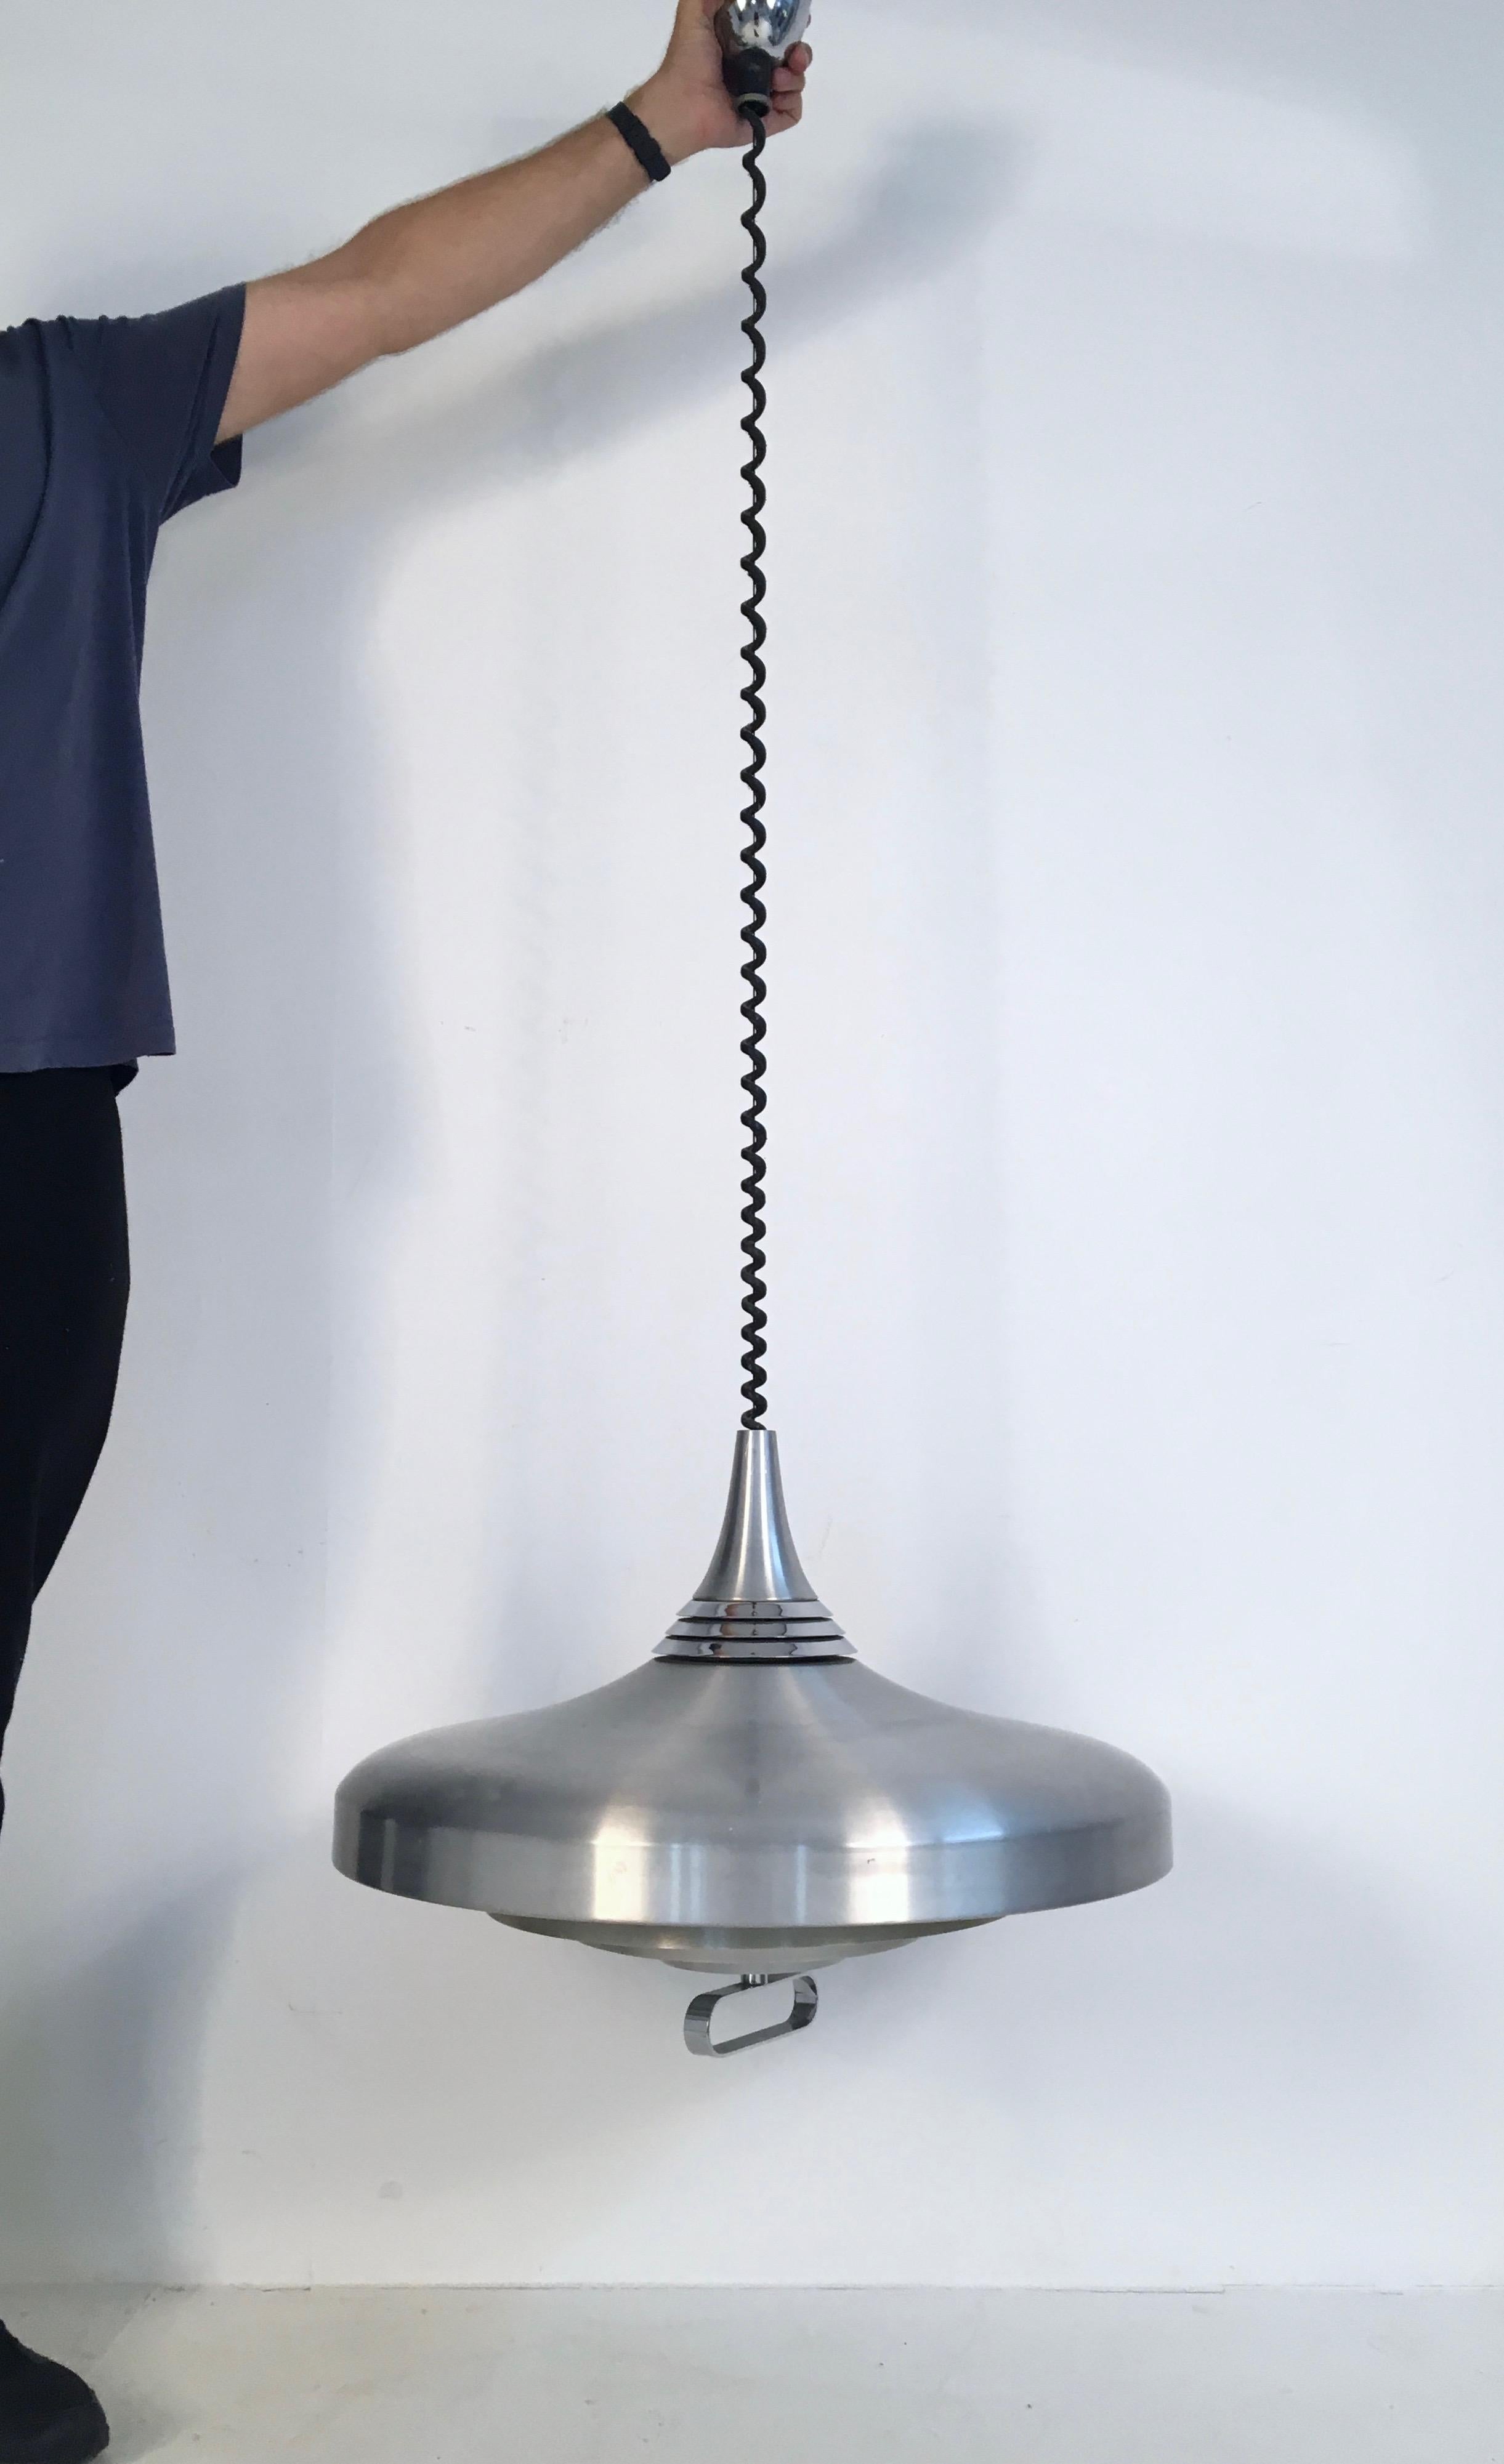 Superb, large, rise and fall aluminium pendant lamp in brushed aluminium. Approximate 70cm in diameter, the pendant pulls down to nearly 170cm. It takes 6 bulbs.

The rise and fall mechanism and lamp work perfectly. There are minor imperfections